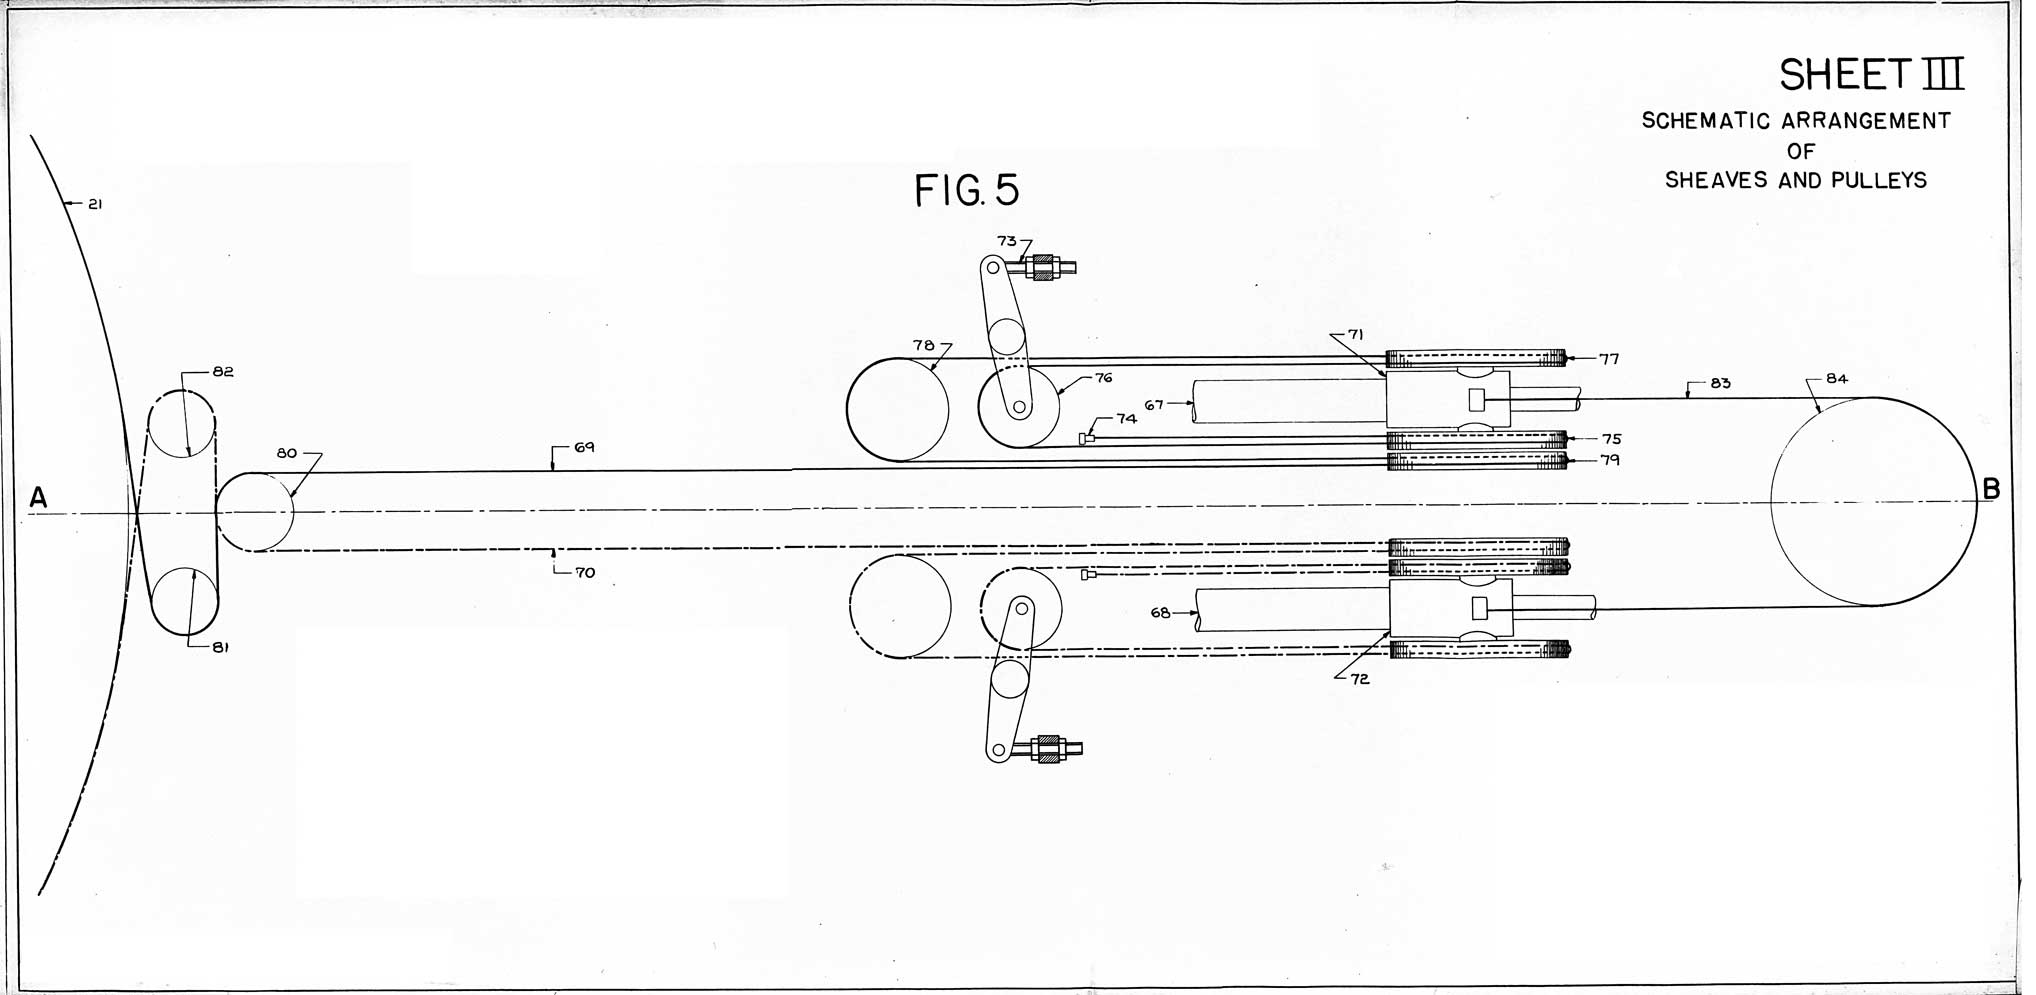 Sheet III, Schematic Arrangement of Sheaves and Pulleys